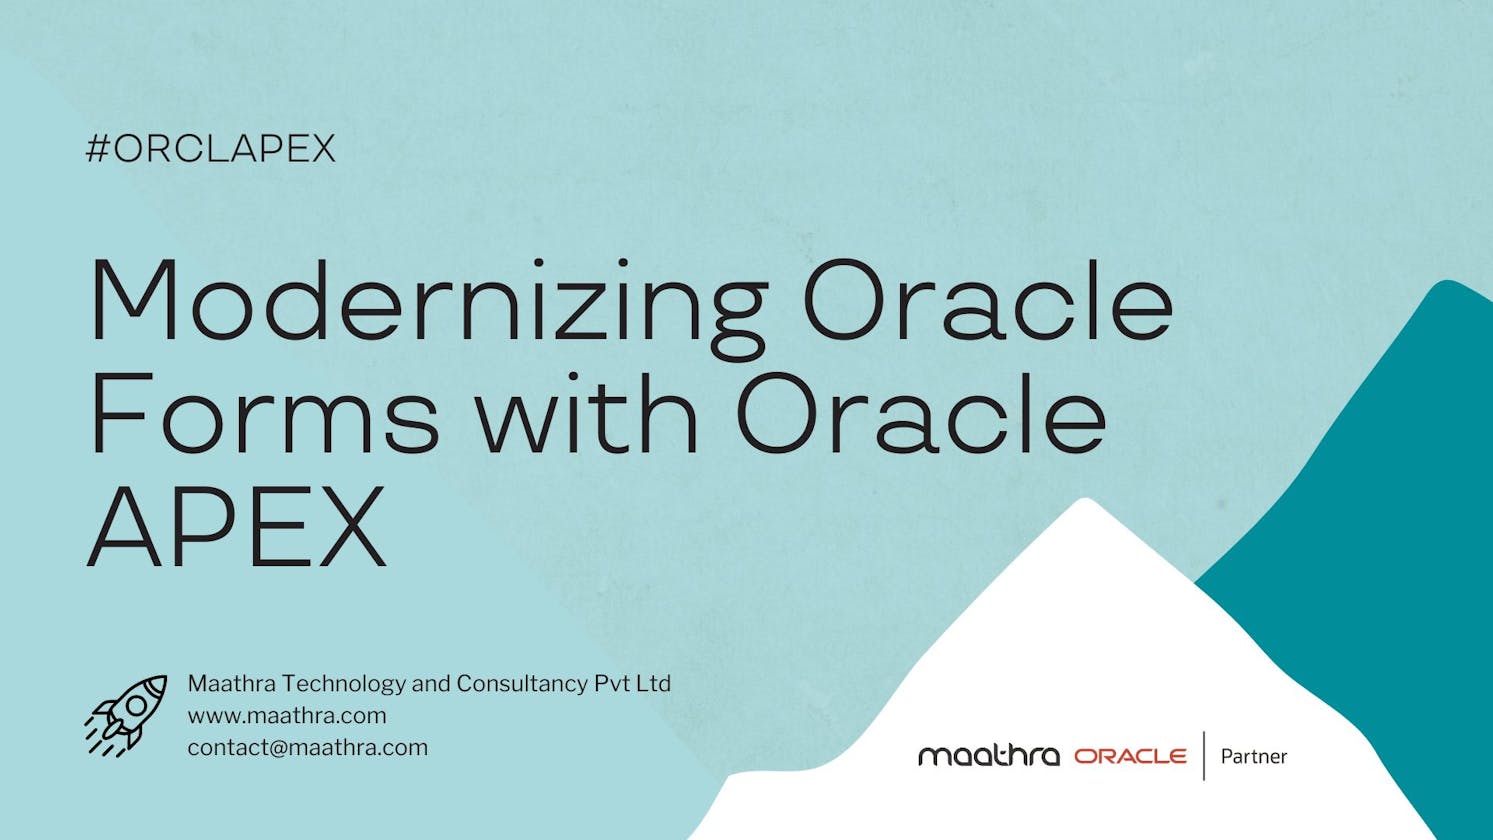 Oracle APEX Use Cases: Modernizing Oracle Forms